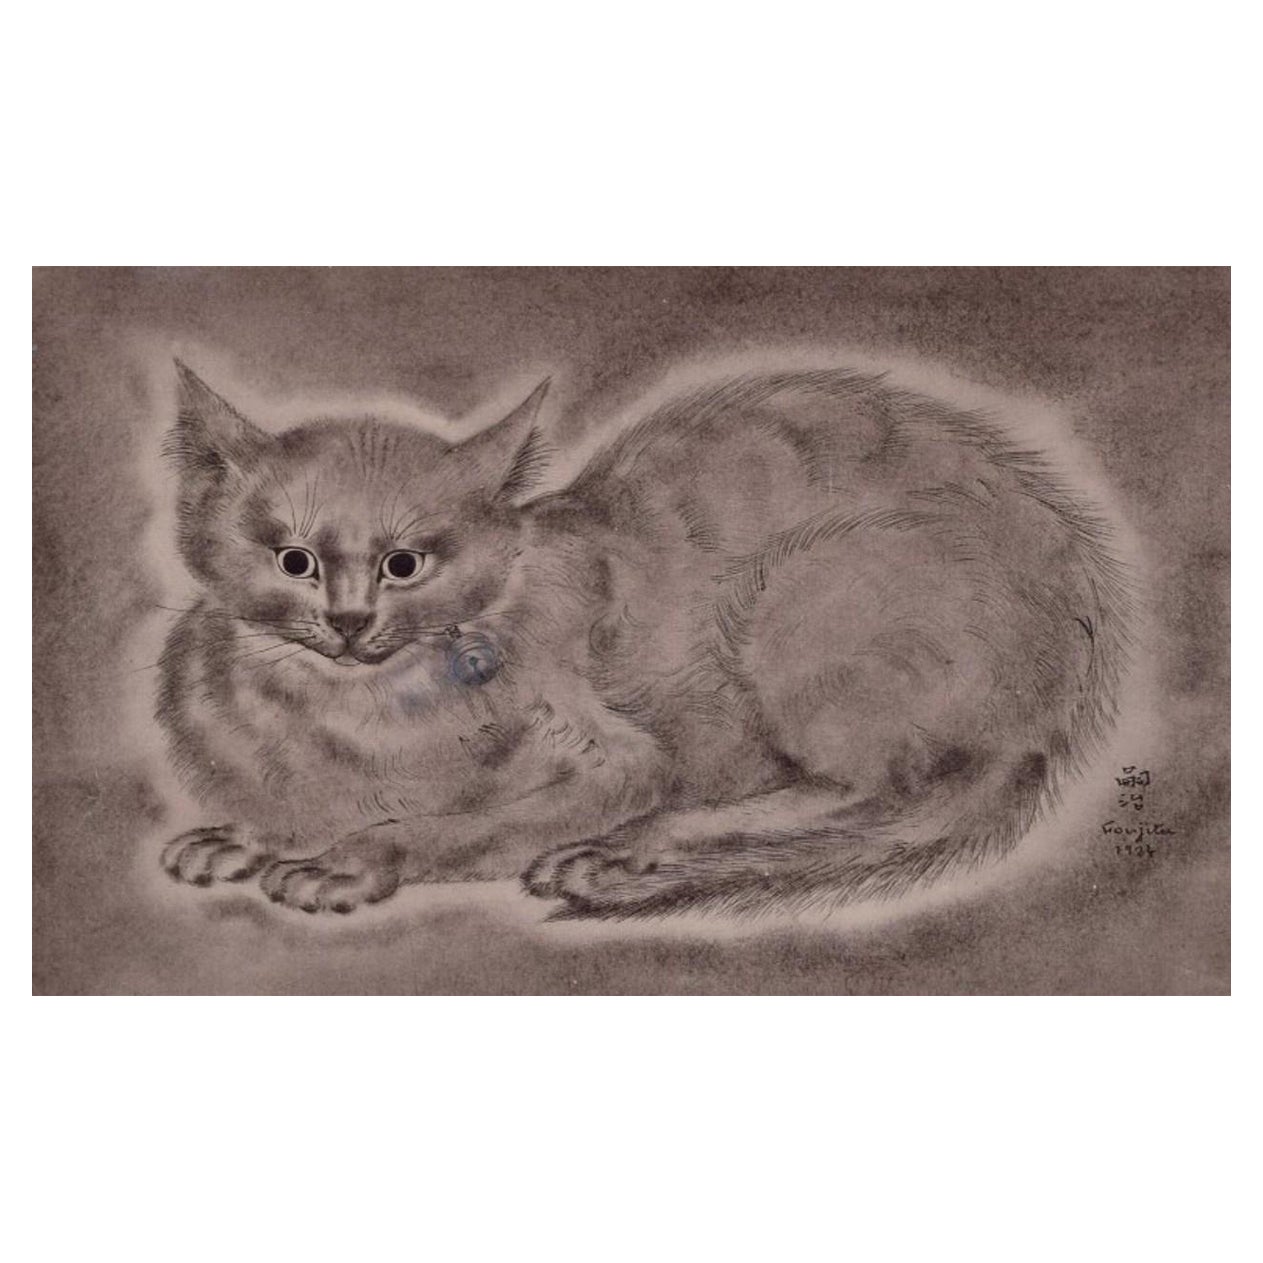 Foujita Tsuguhanu (1886-1968). Etching on paper. Trial proof. Portrait of a cat For Sale